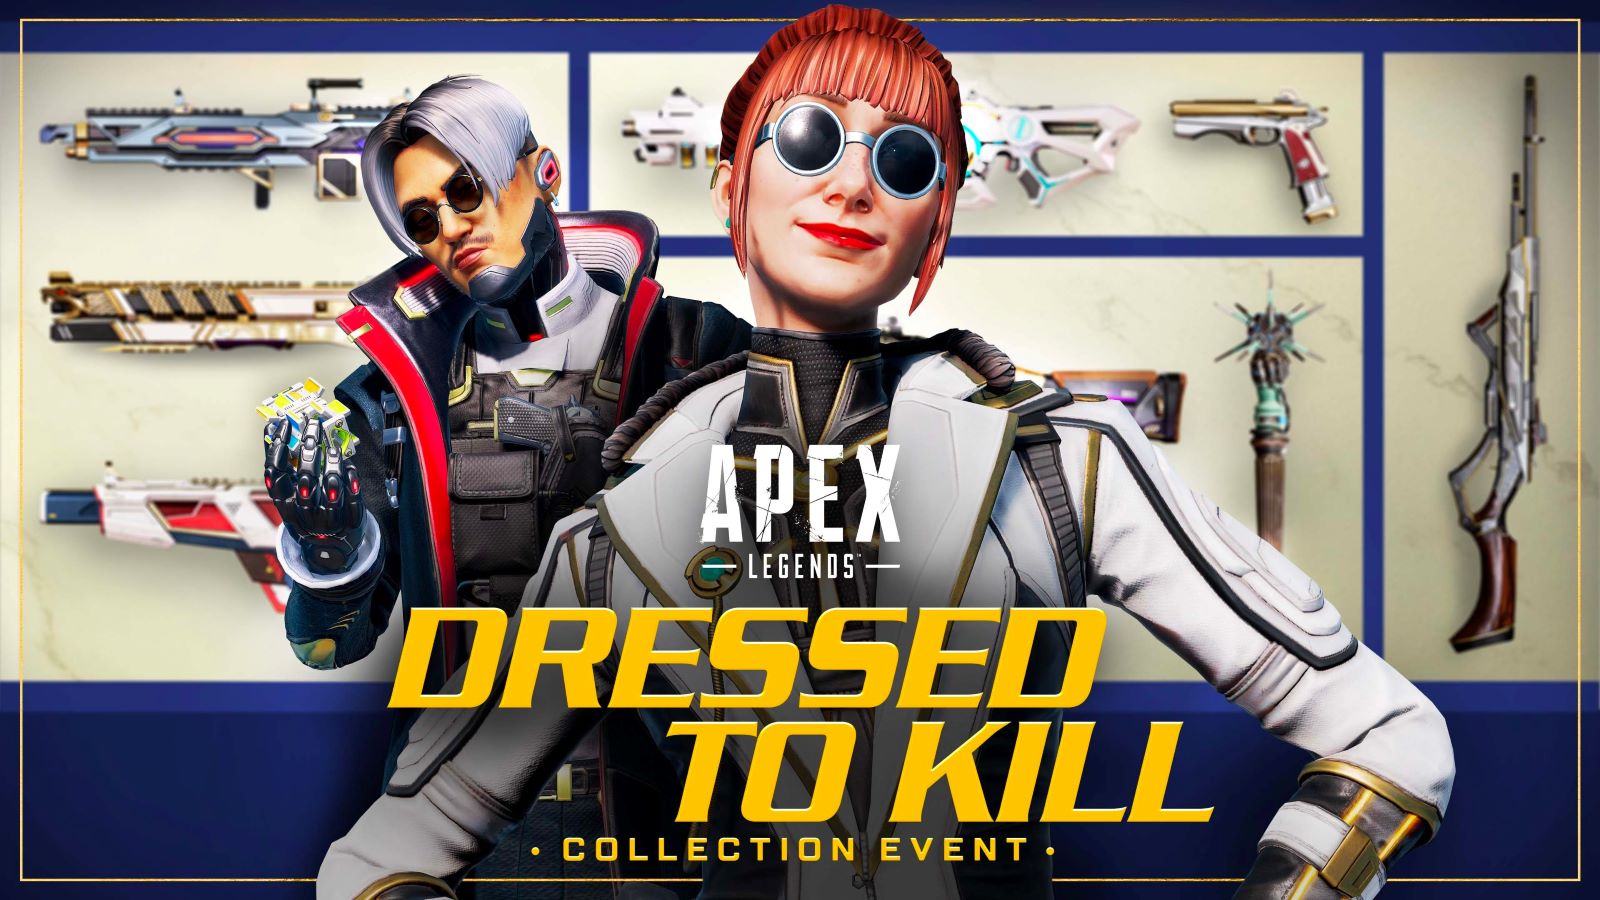 Dressed to Kill Collection Event in Apex Legends is now live  GAMINGTREND